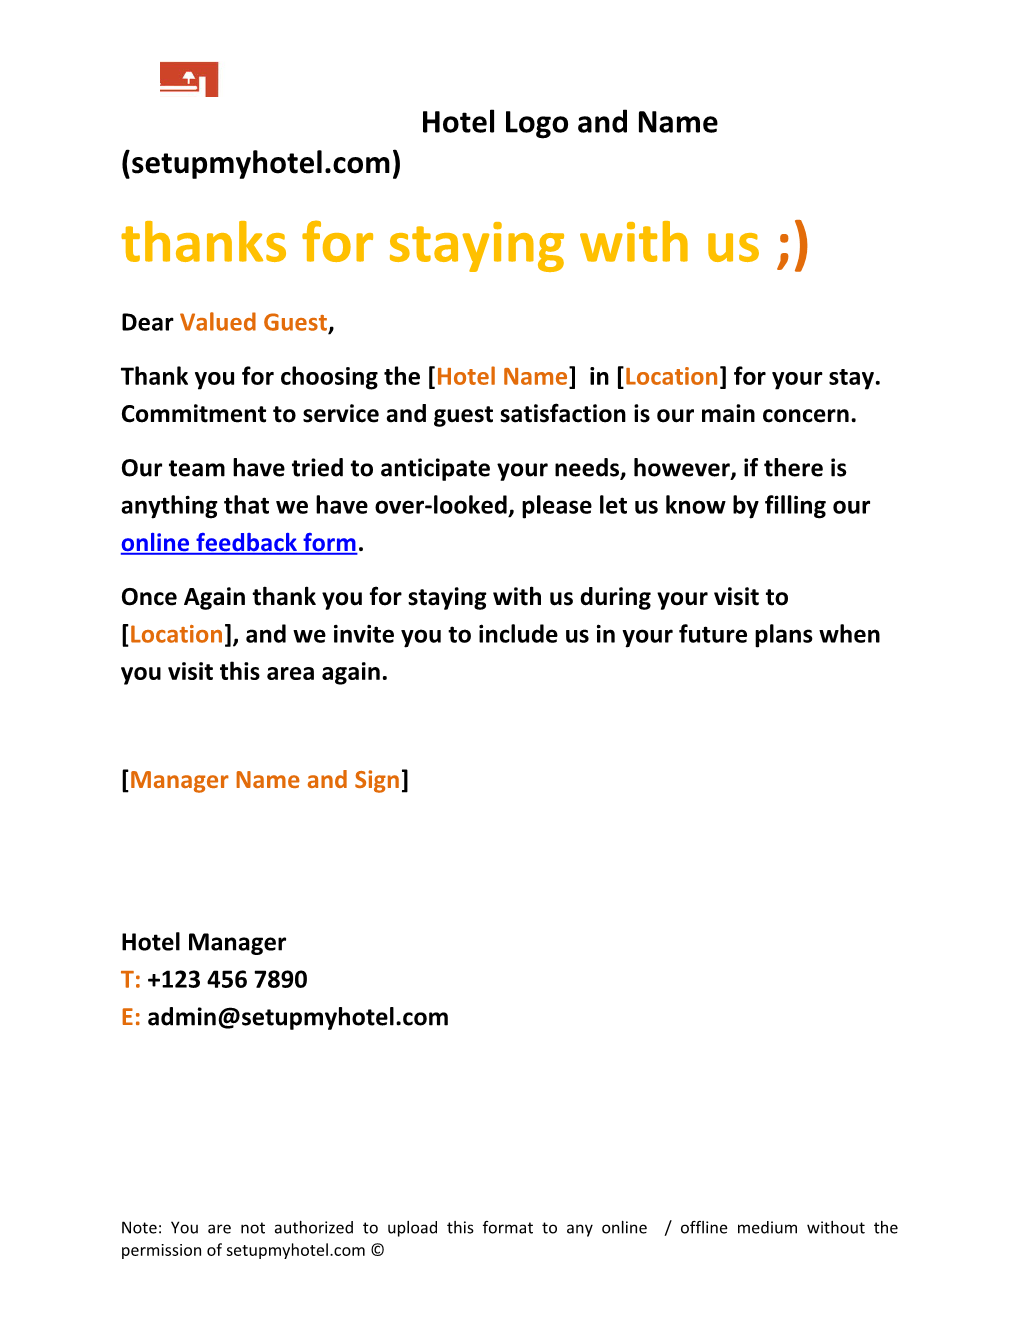 Hotel Guest Thank You Letter